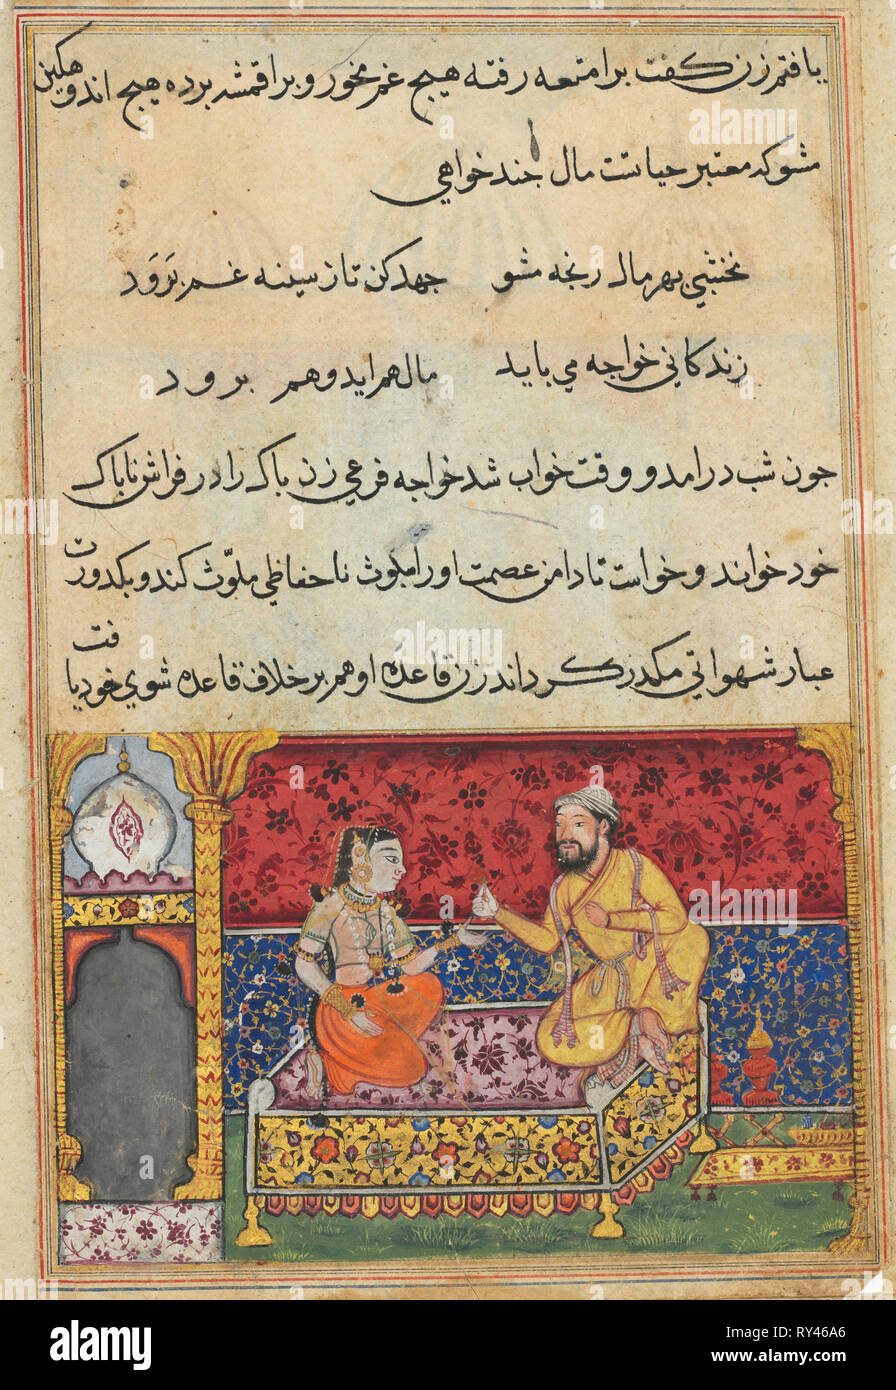 Page from Tales of a Parrot (Tuti-nama): Seventeenth night: The young man changes himself to look like Mansur, and thus inveigles himself into the bed of Mansur’s wife, but is put off by her, c. 1560. India, Mughal, Reign of Akbar, 16th century. Opaque watercolor, ink and gold on paper Stock Photo